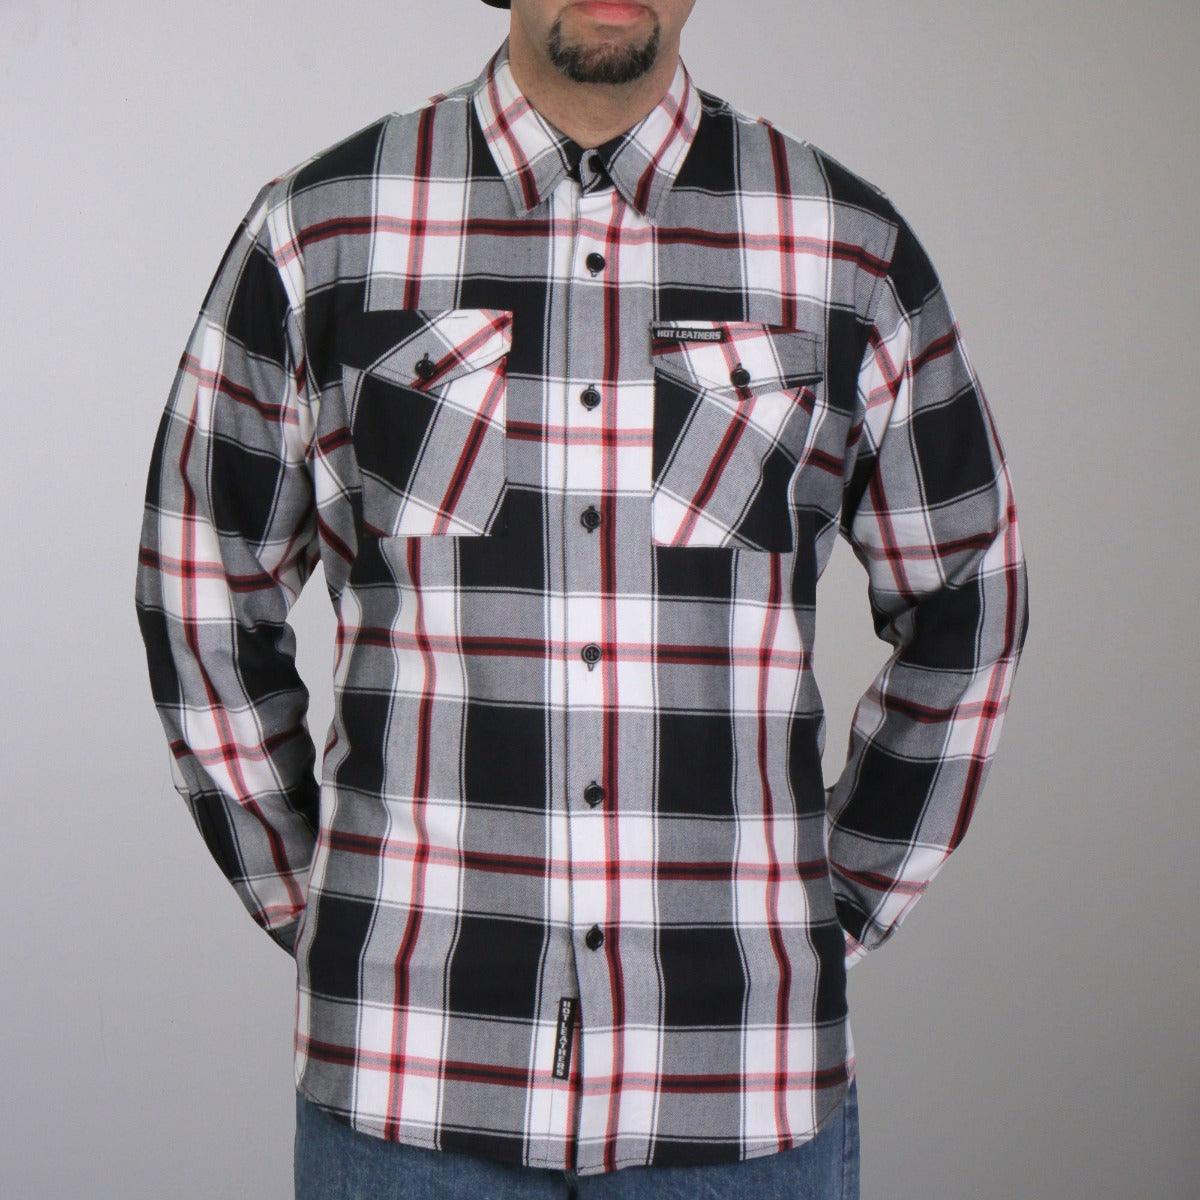 Hot Leathers Men's Black White And Red Long Sleeve Flannel - American Legend Rider